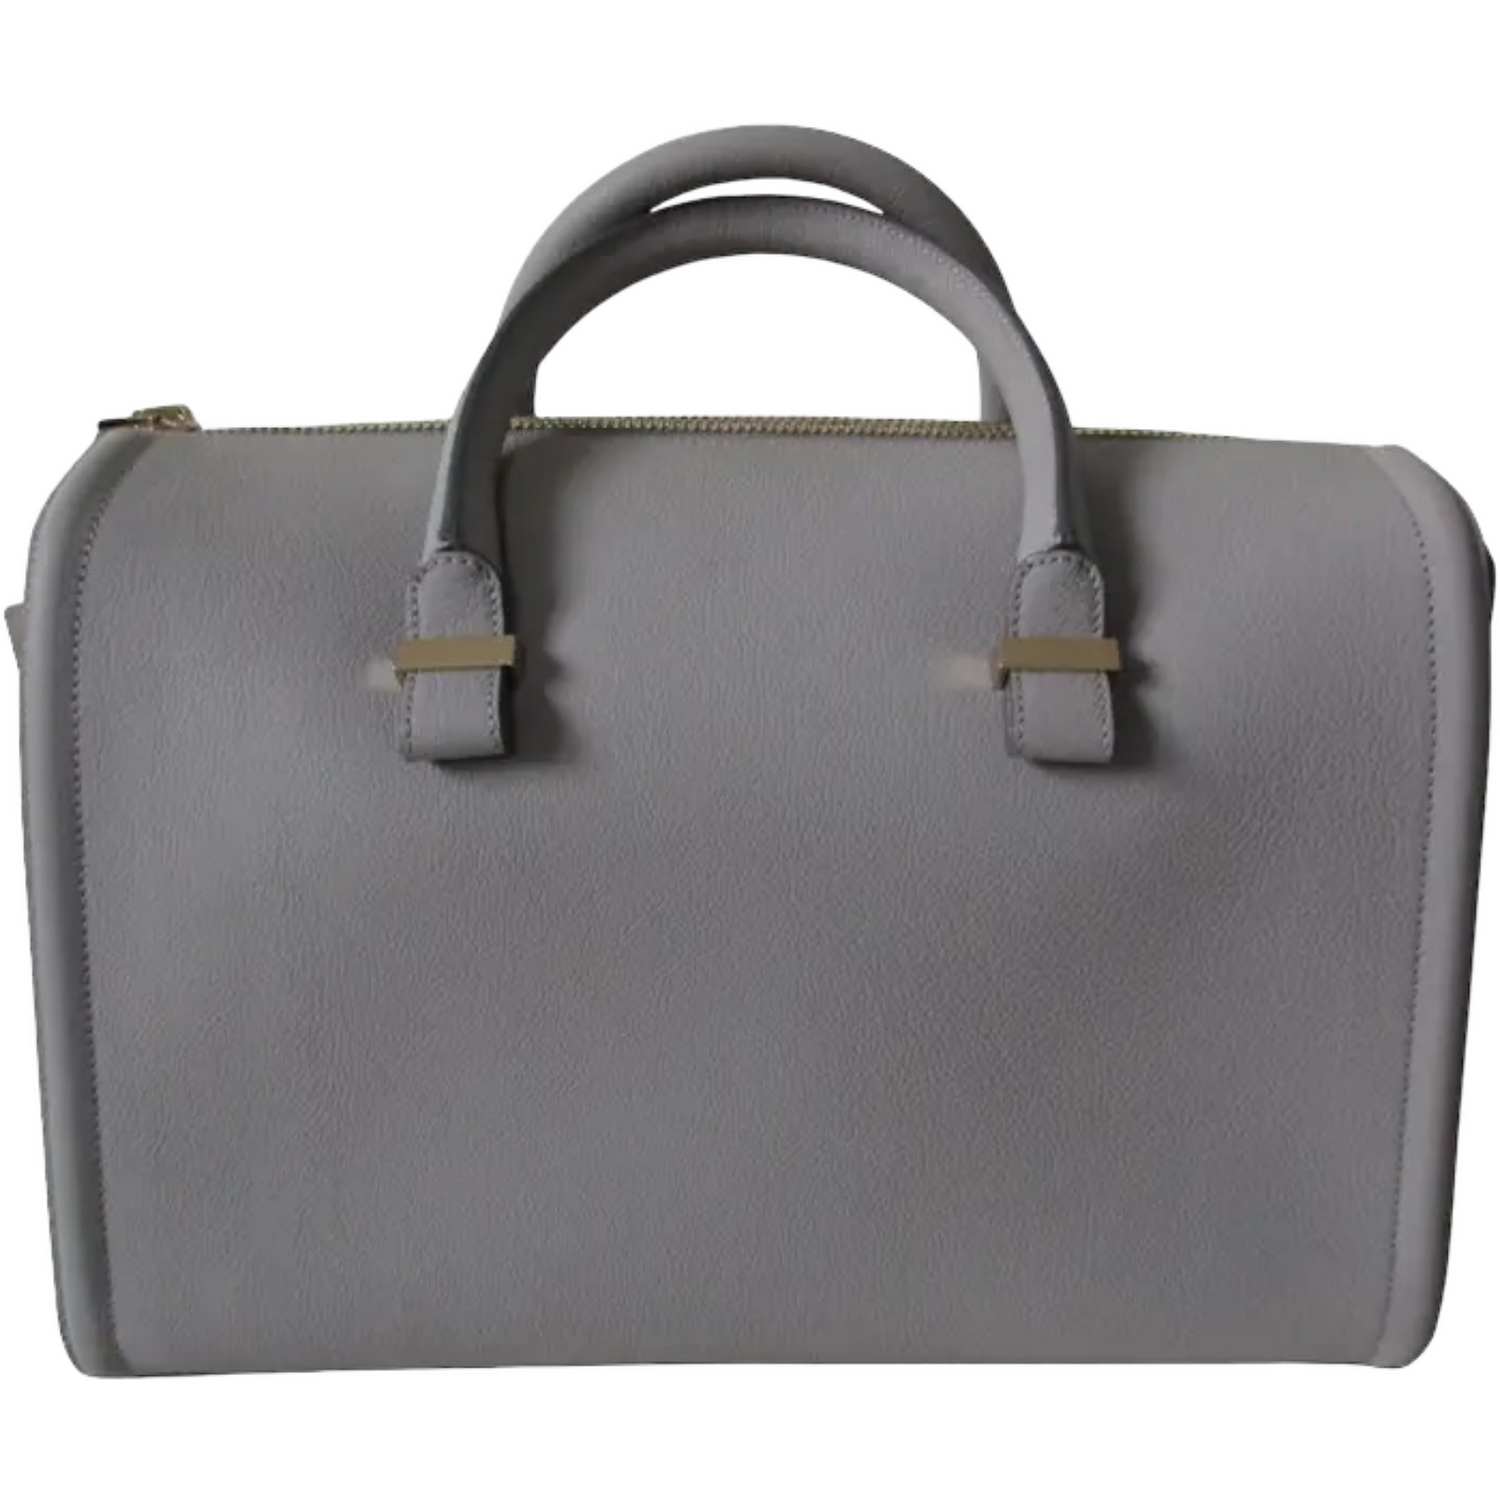 Grey Leather Handbag lined with linen, hardware in light gold